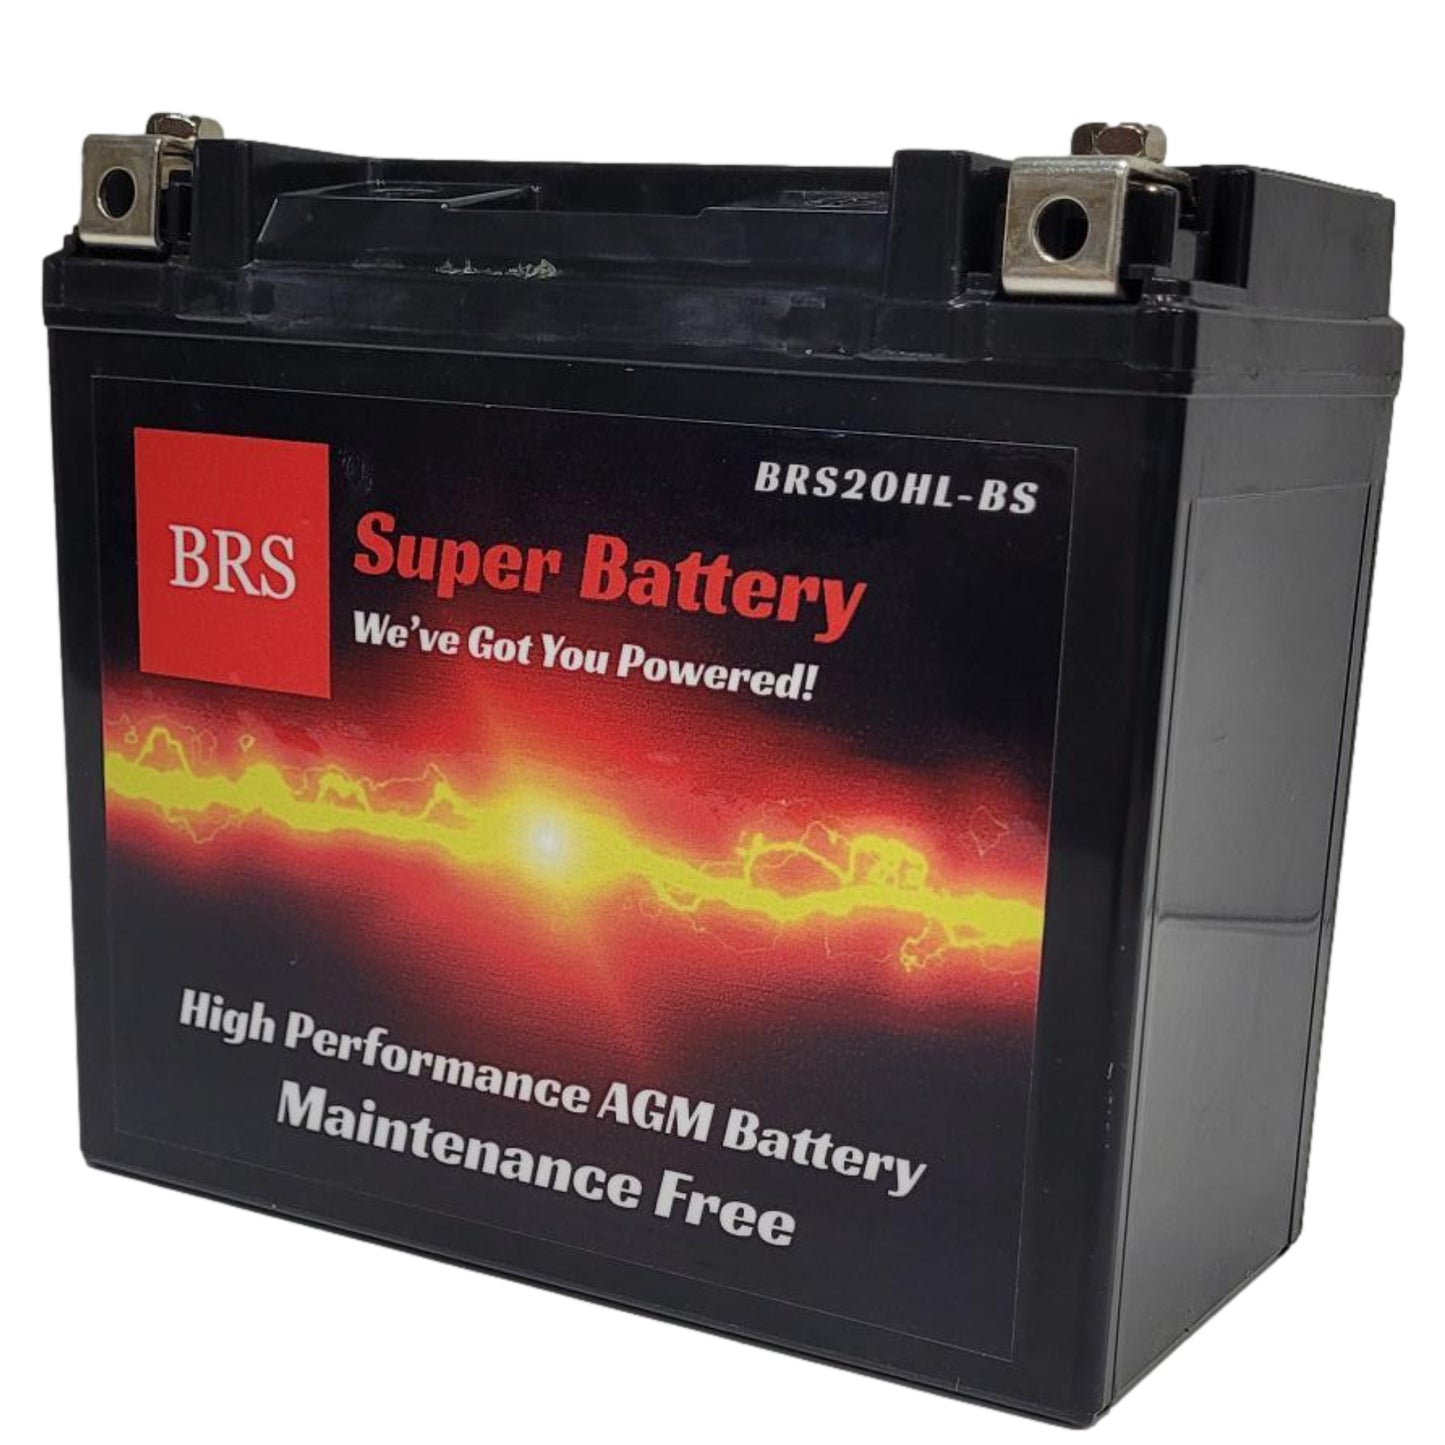 WPX20HL-BS 12v High Performance Sealed AGM PowerSport 10 Year Battery - BRS Super Battery